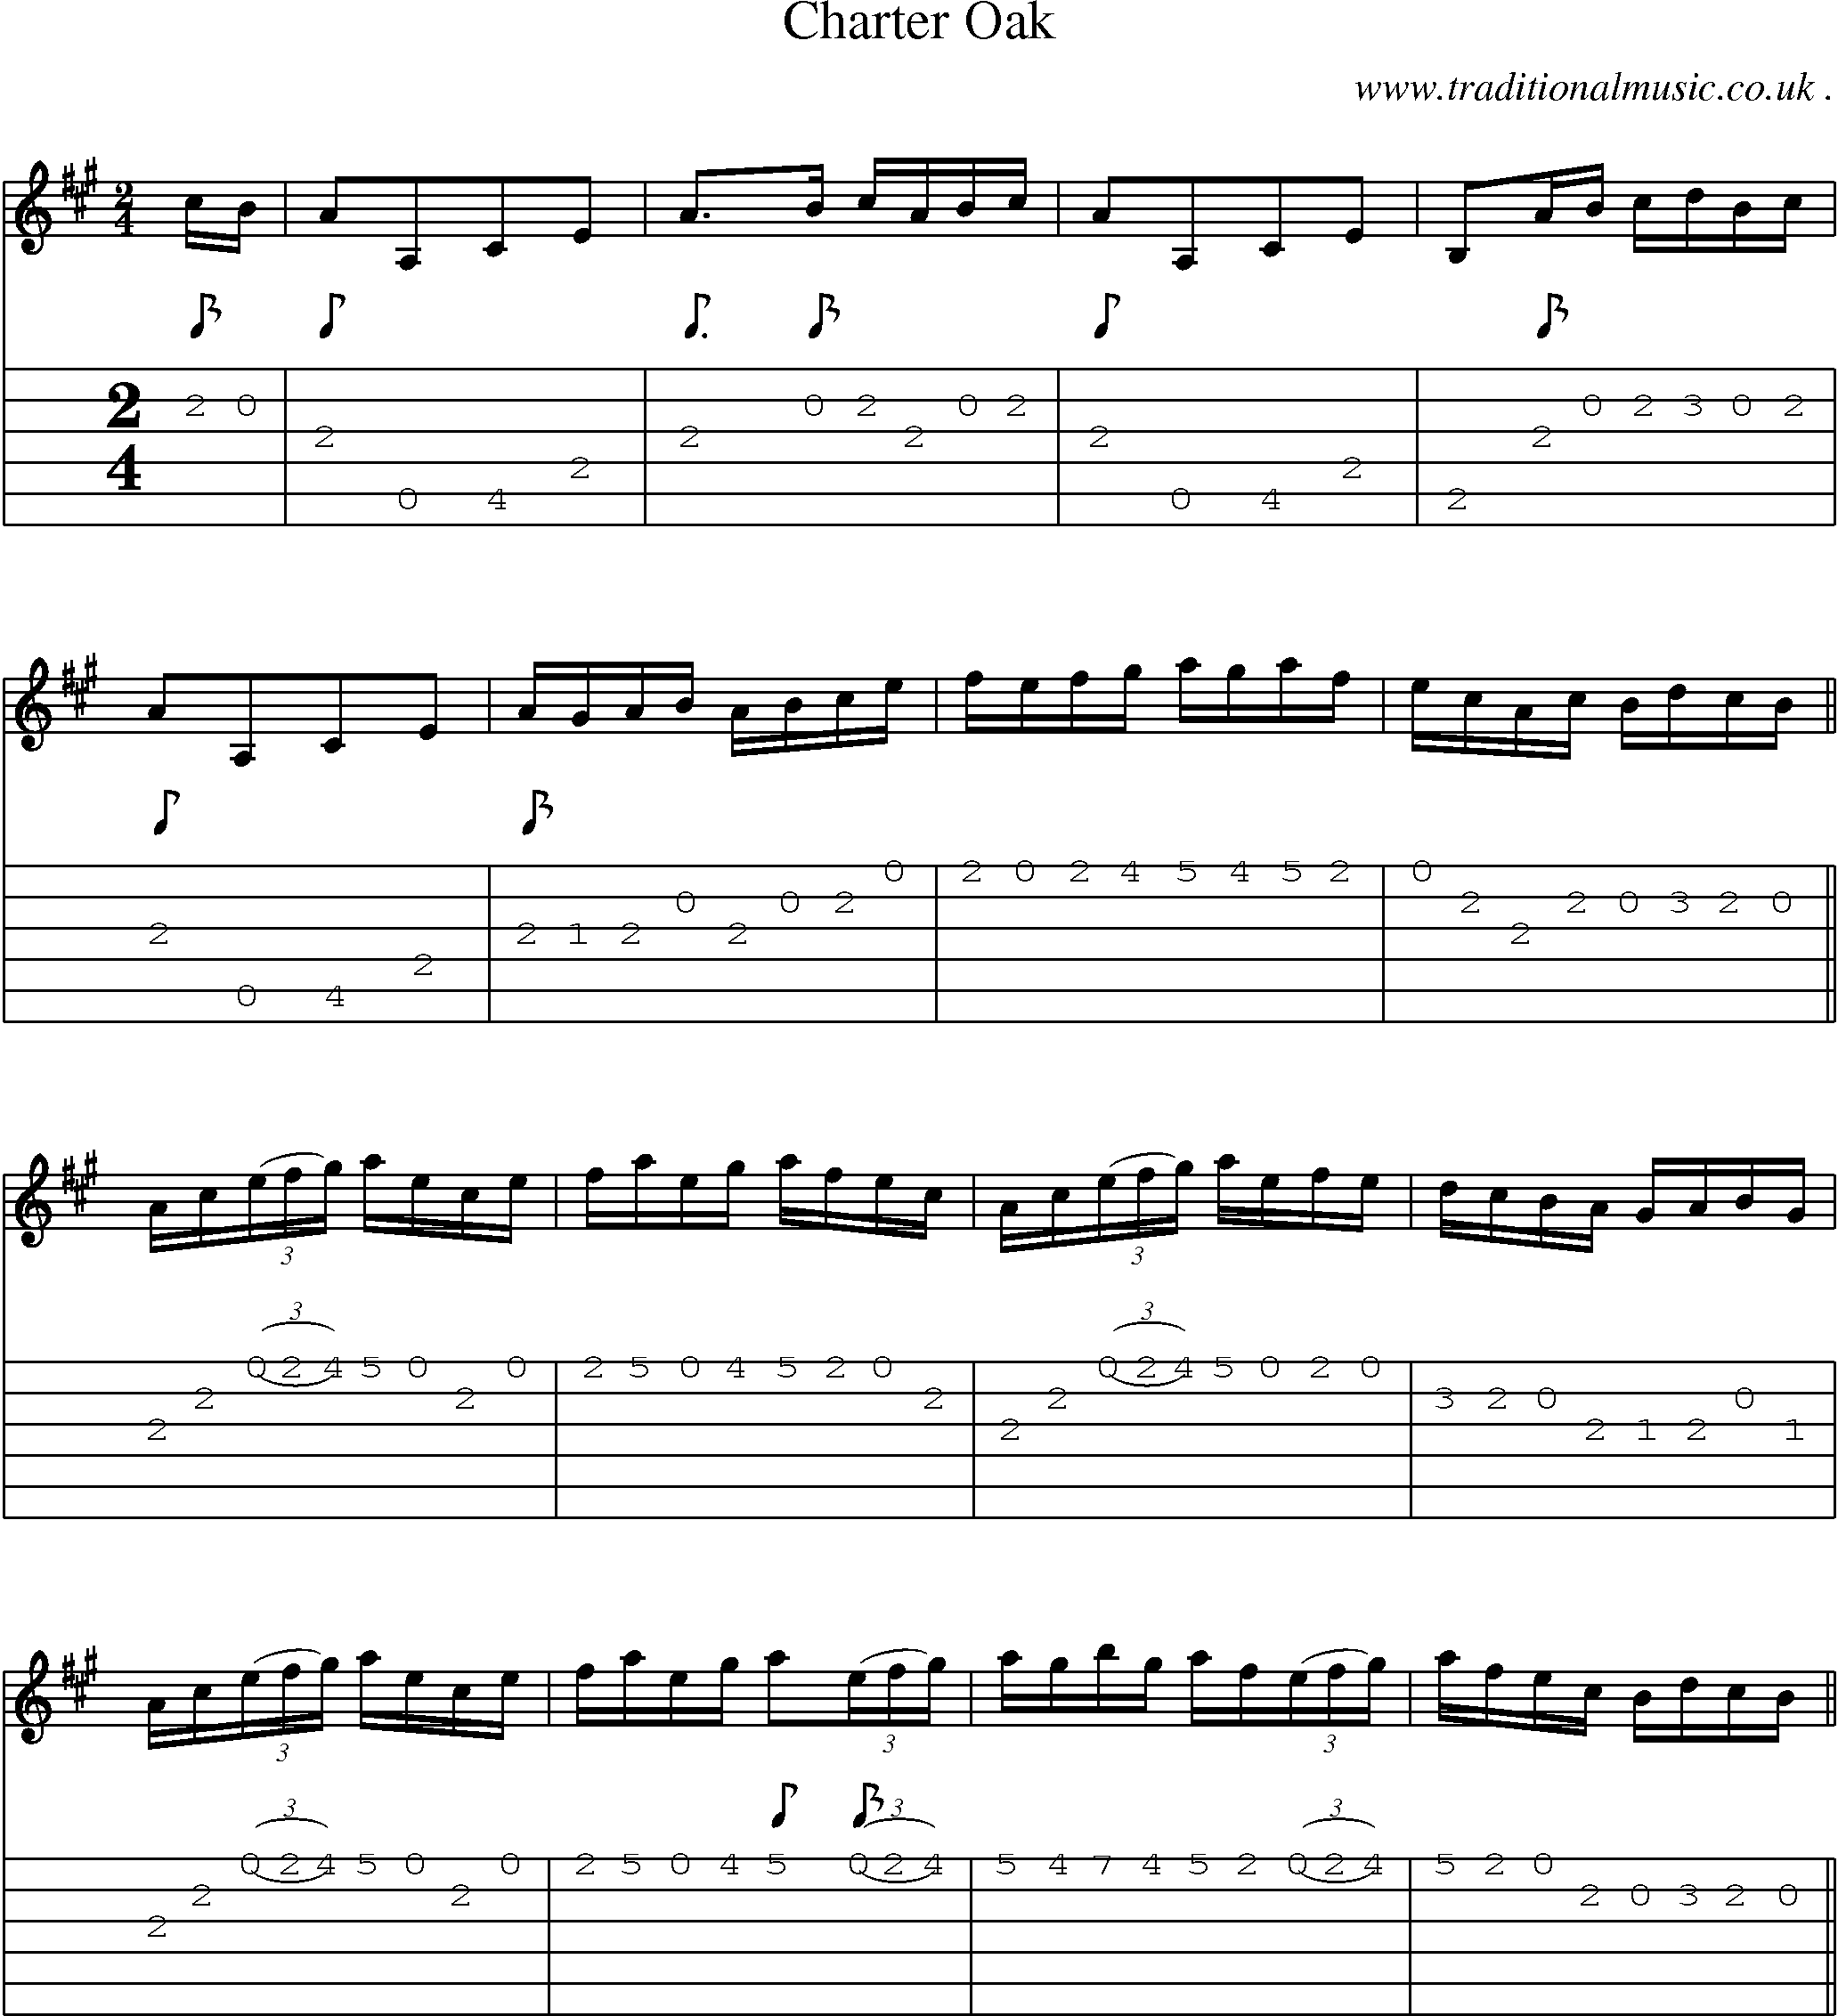 Sheet-Music and Guitar Tabs for Charter Oak